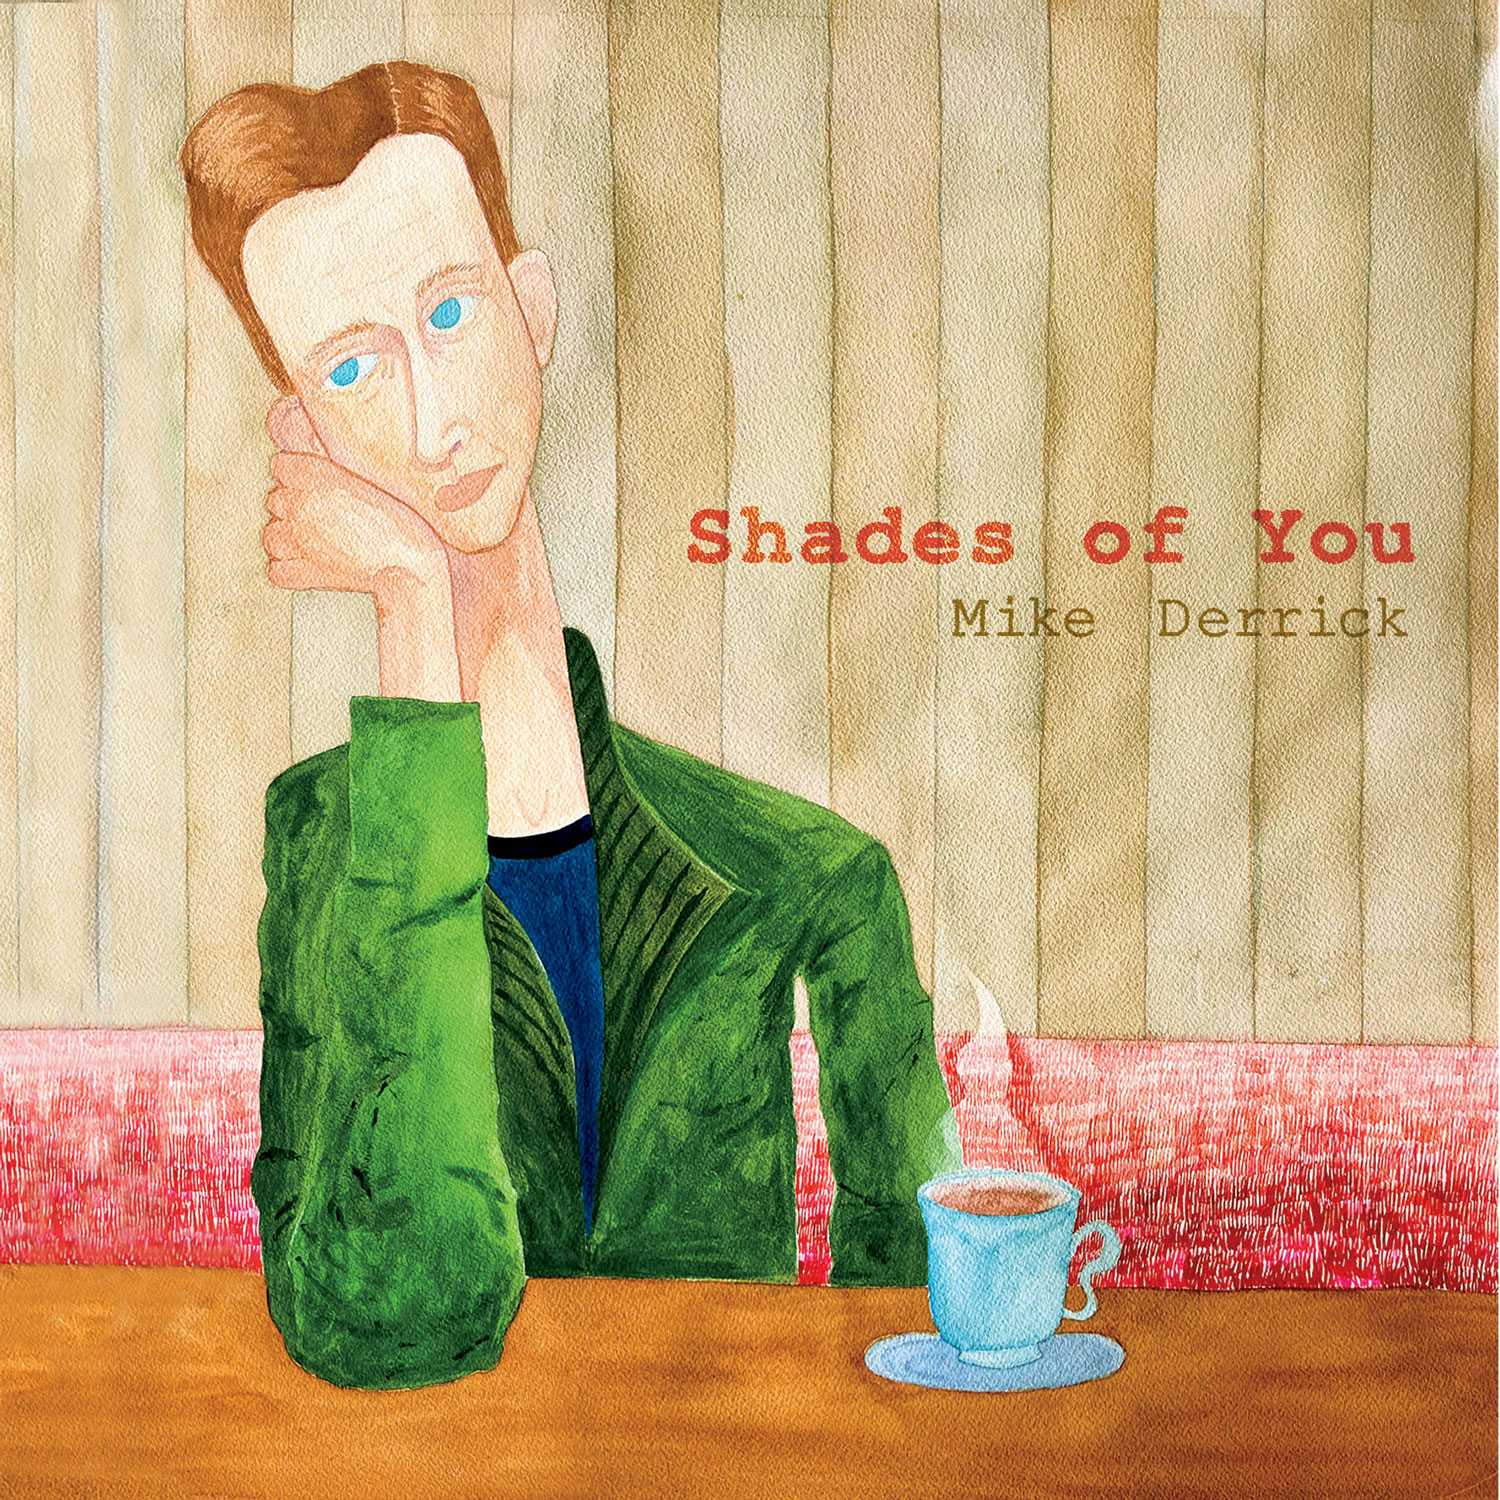 Artwork for the album ‘Shades of You’ by Mike Derrick